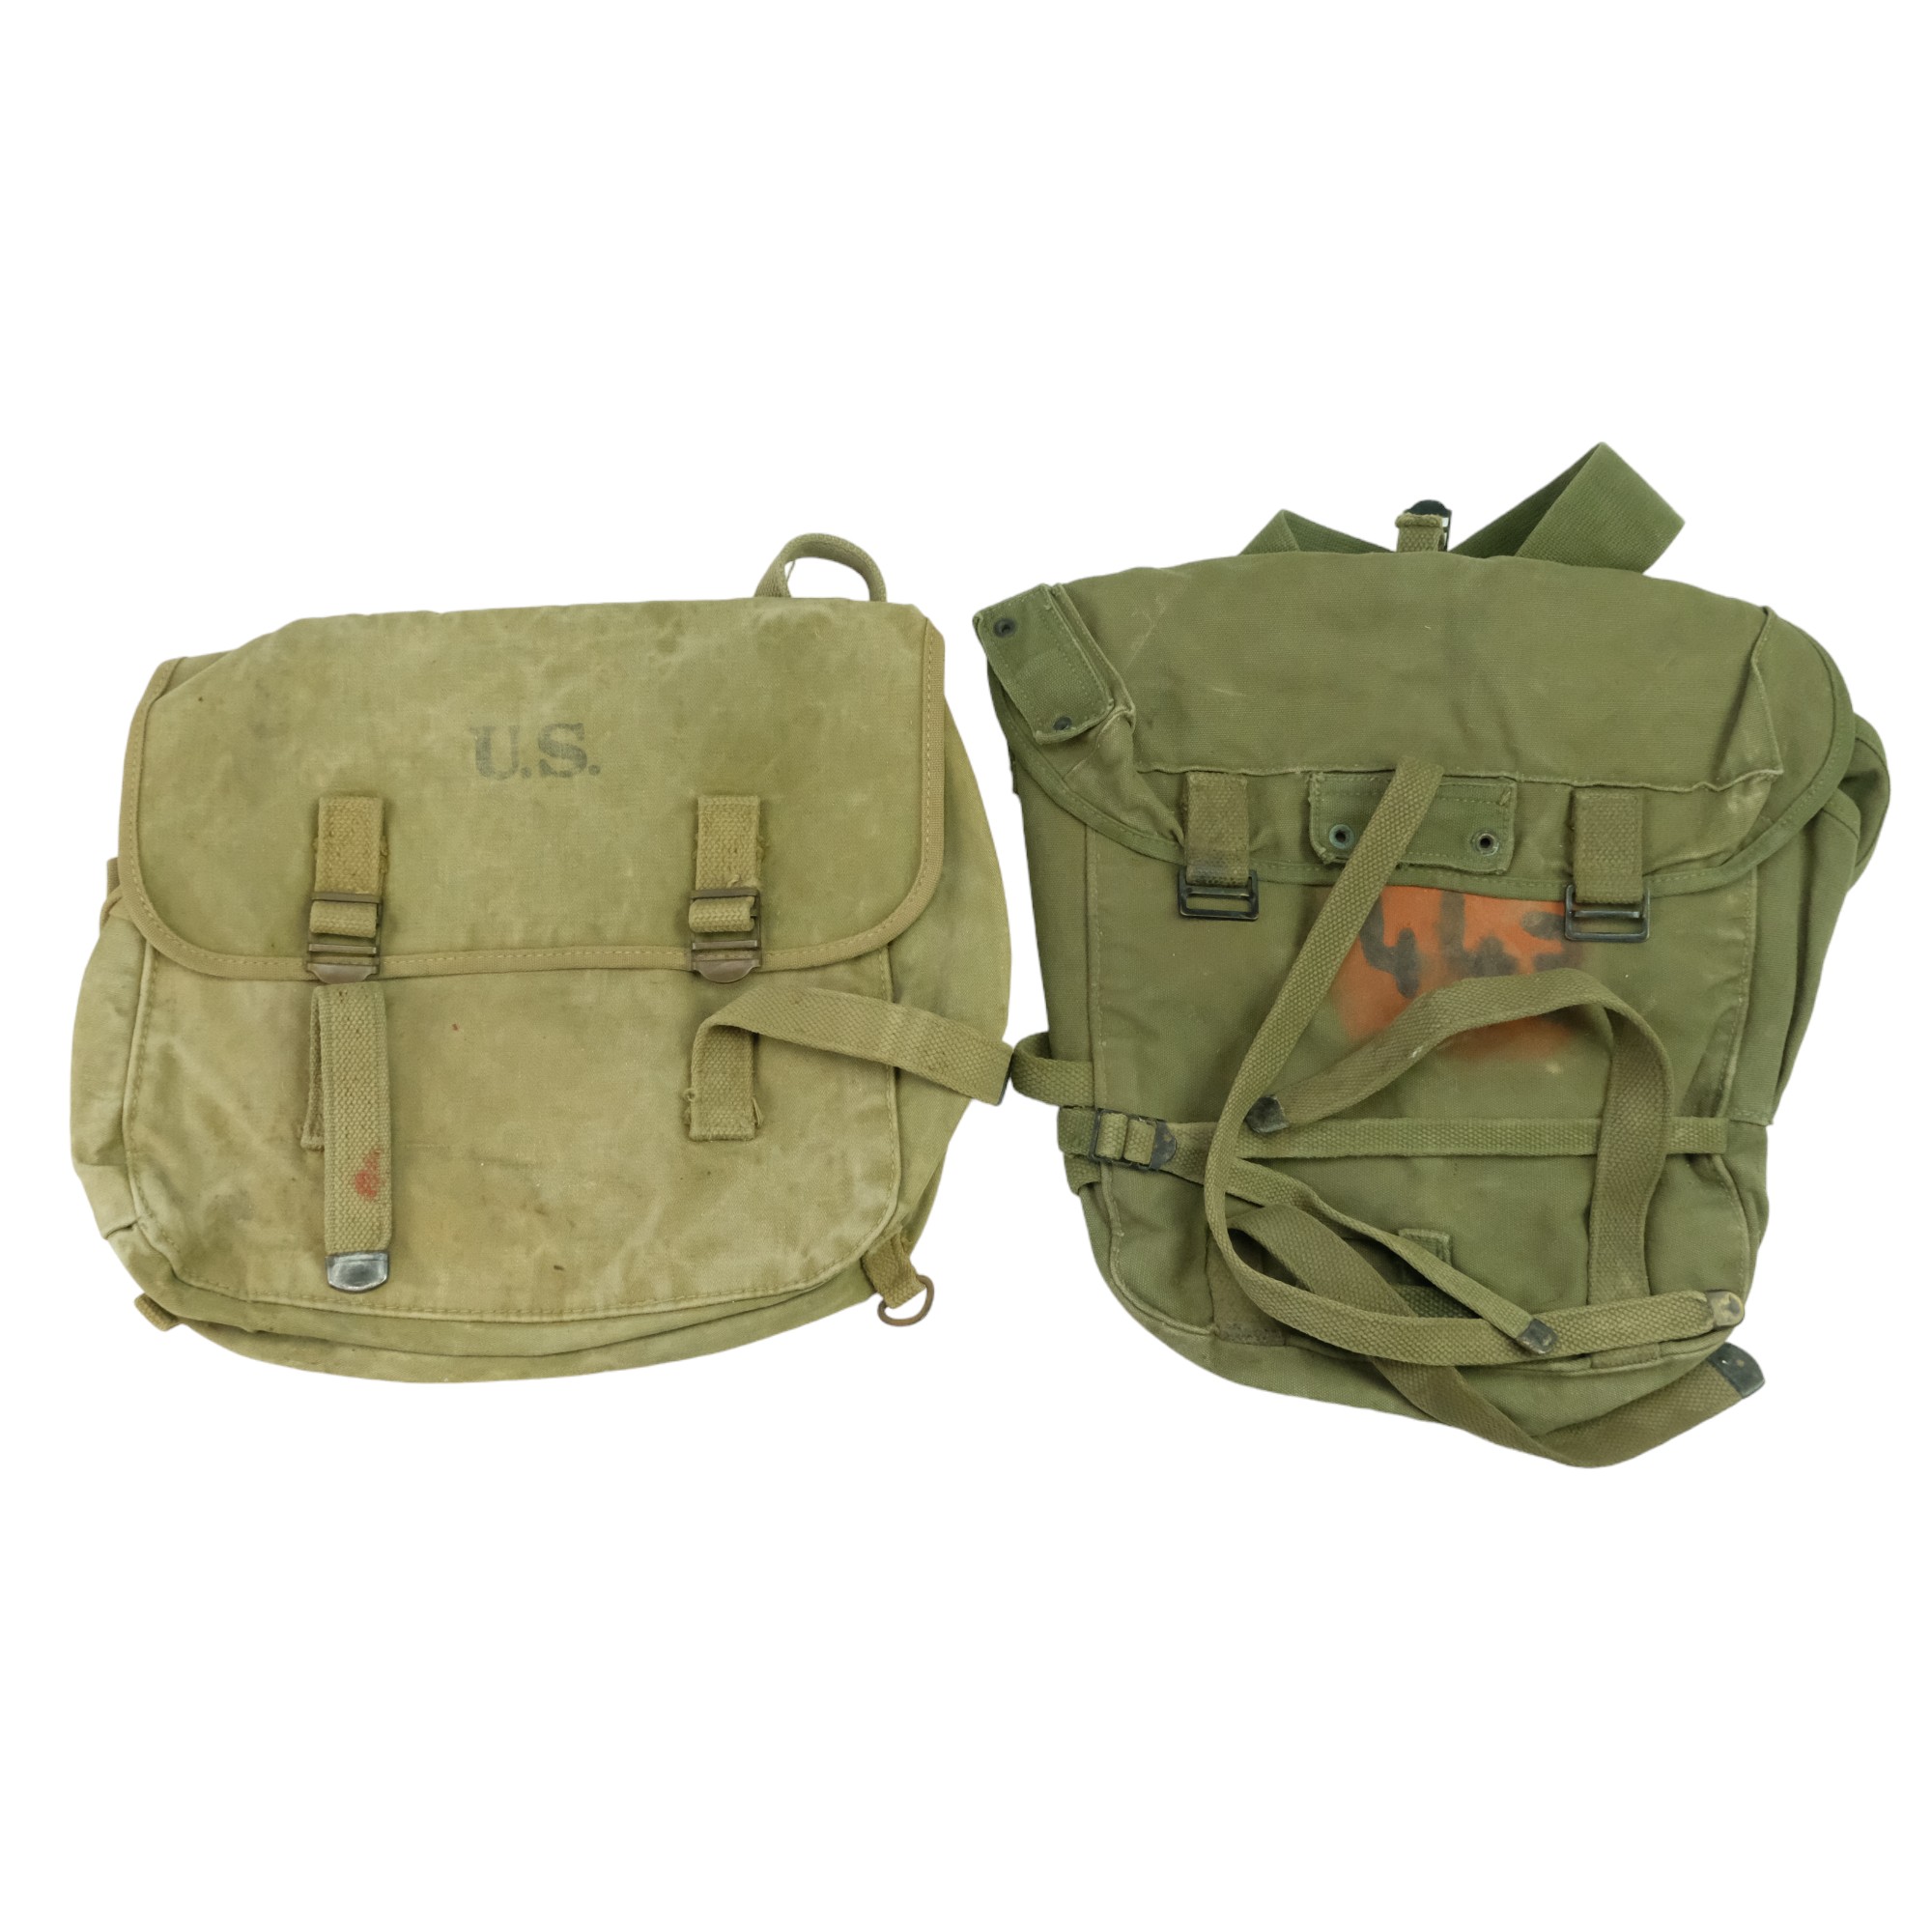 A Second World War US Army M 1936 Musette Pack together with Combat Pack